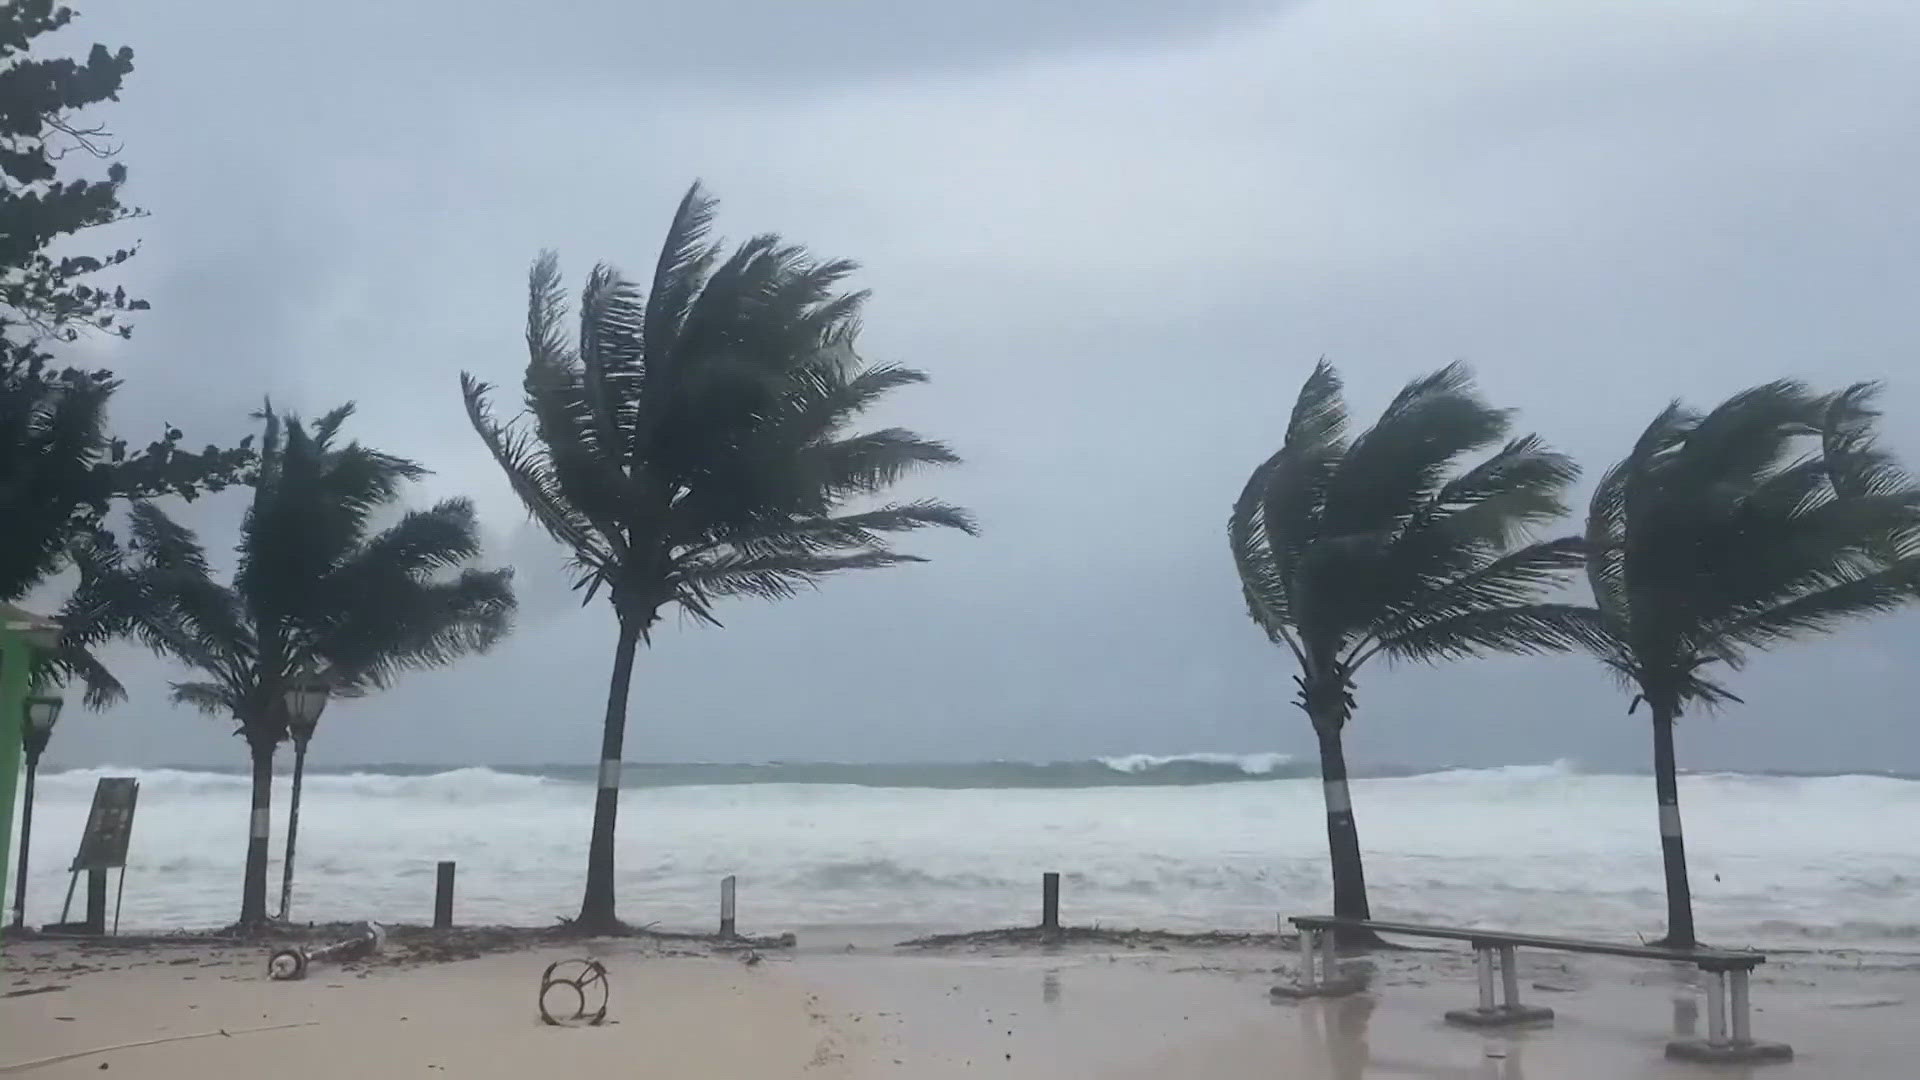 The National Hurricane Center said life-threatening winds and storm surge are possible. Up to six inches of rain is expected across Barbados.